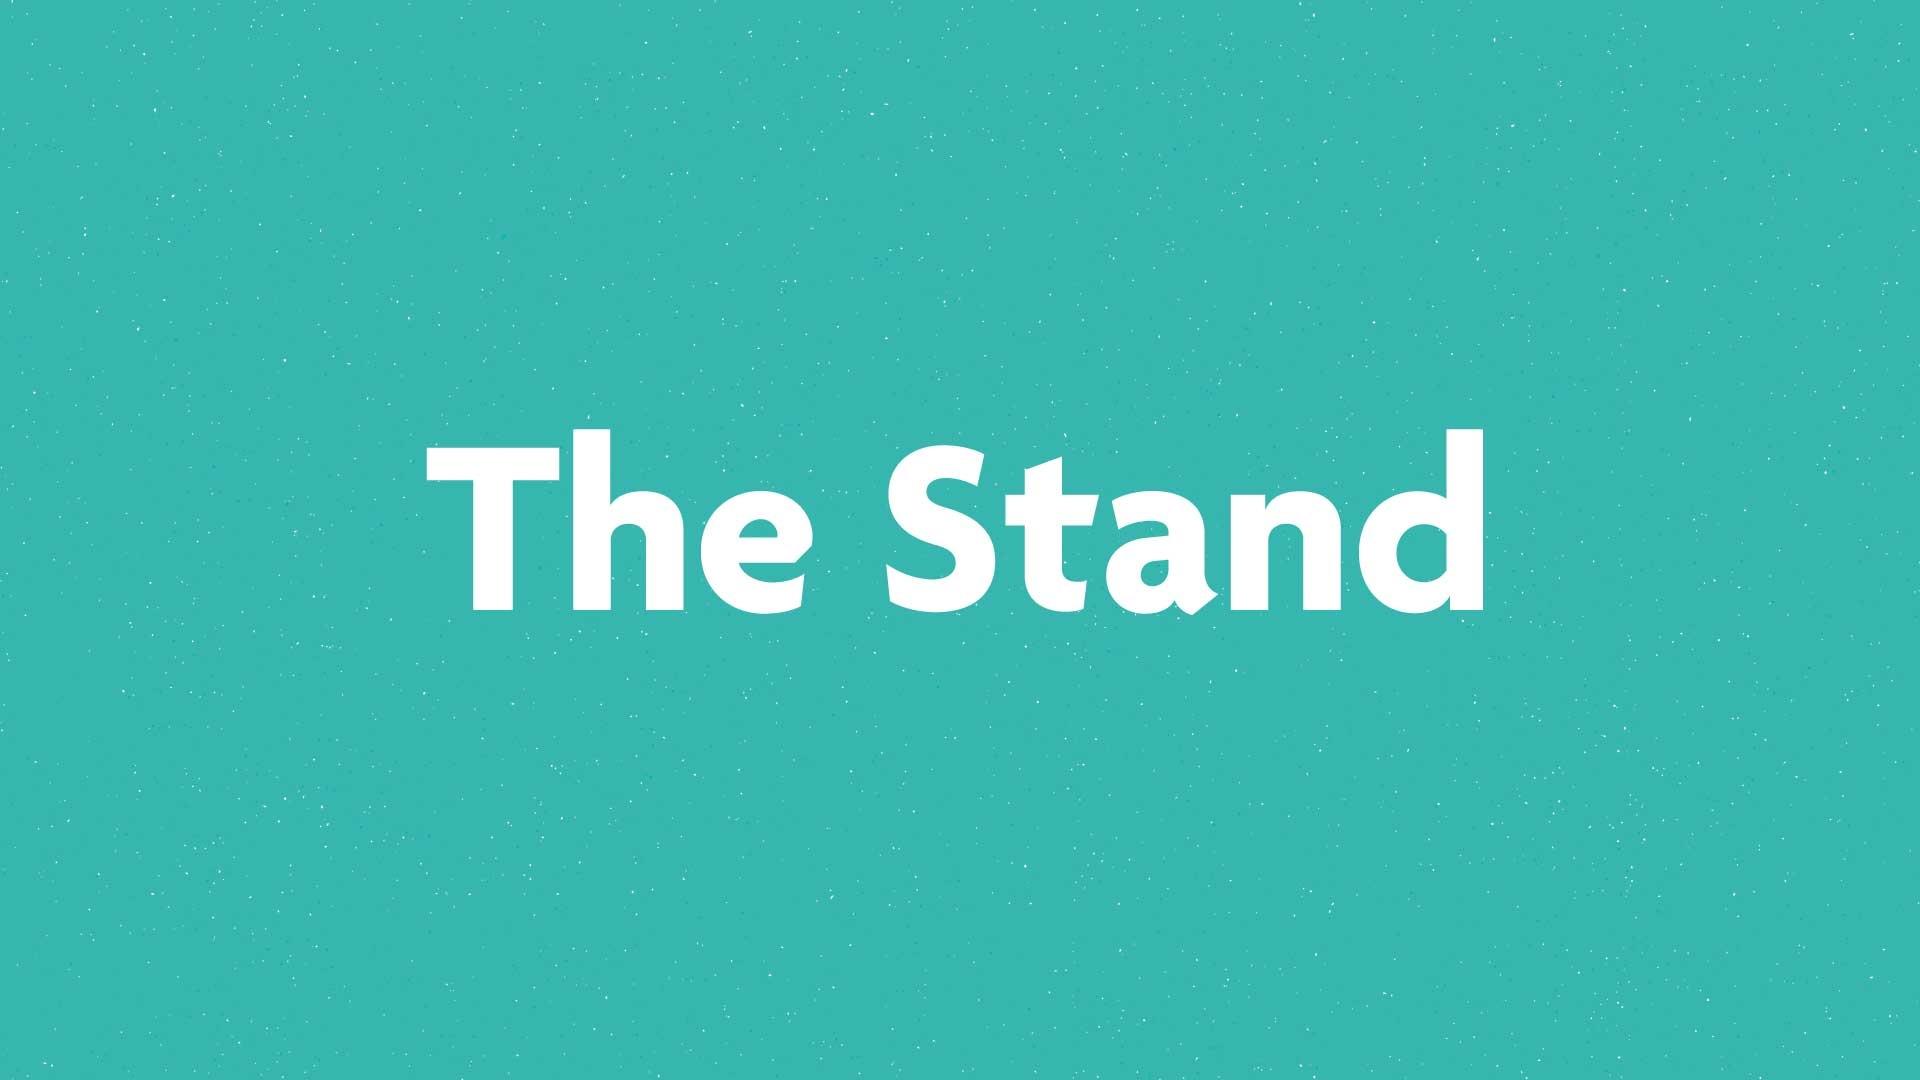 The Stand book submission card on a green background.